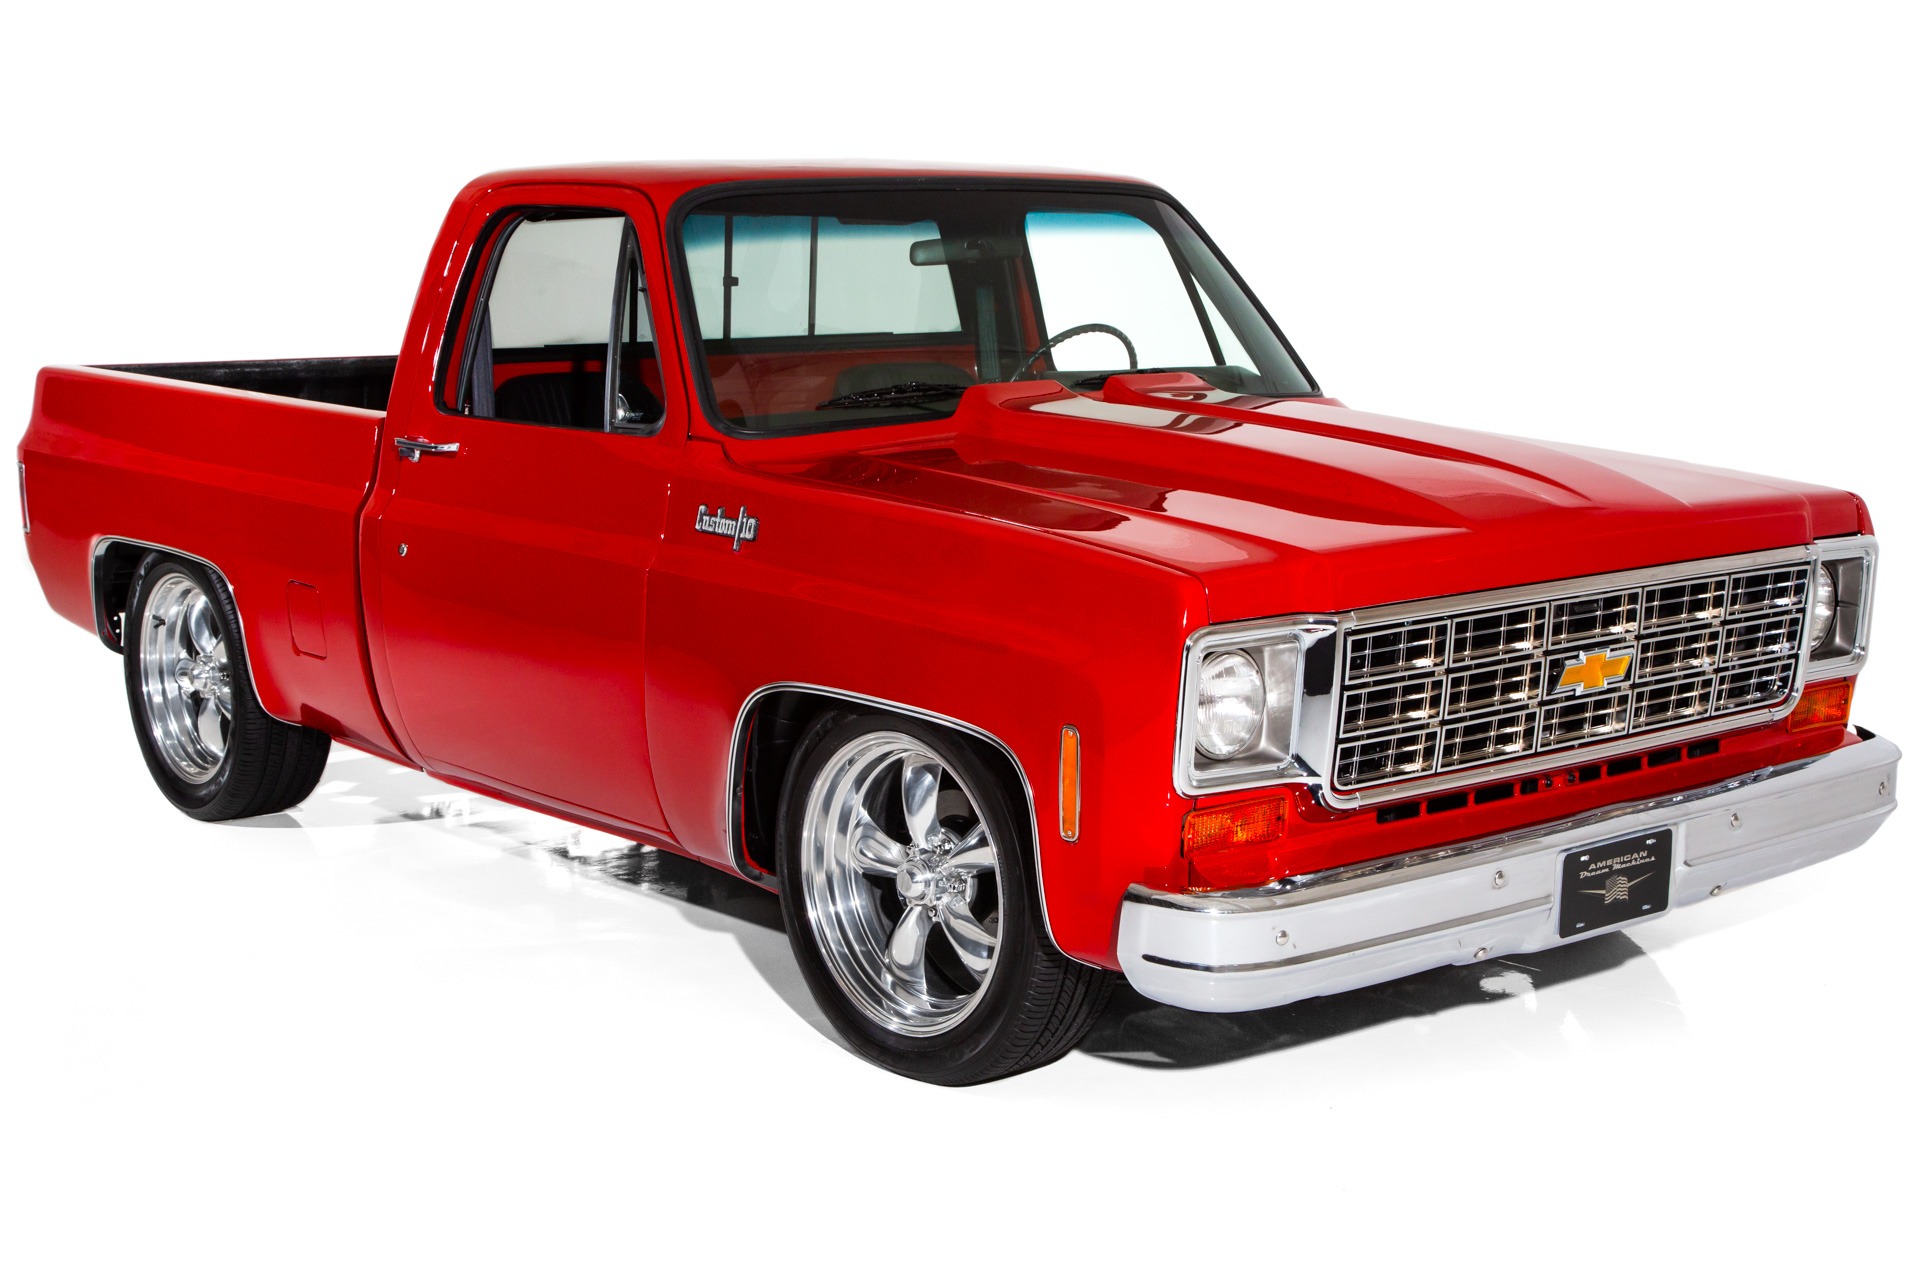 For Sale Used 1973 Chevrolet Pickup 496ci Stroker 5-Speed | American Dream Machines Des Moines IA 50309